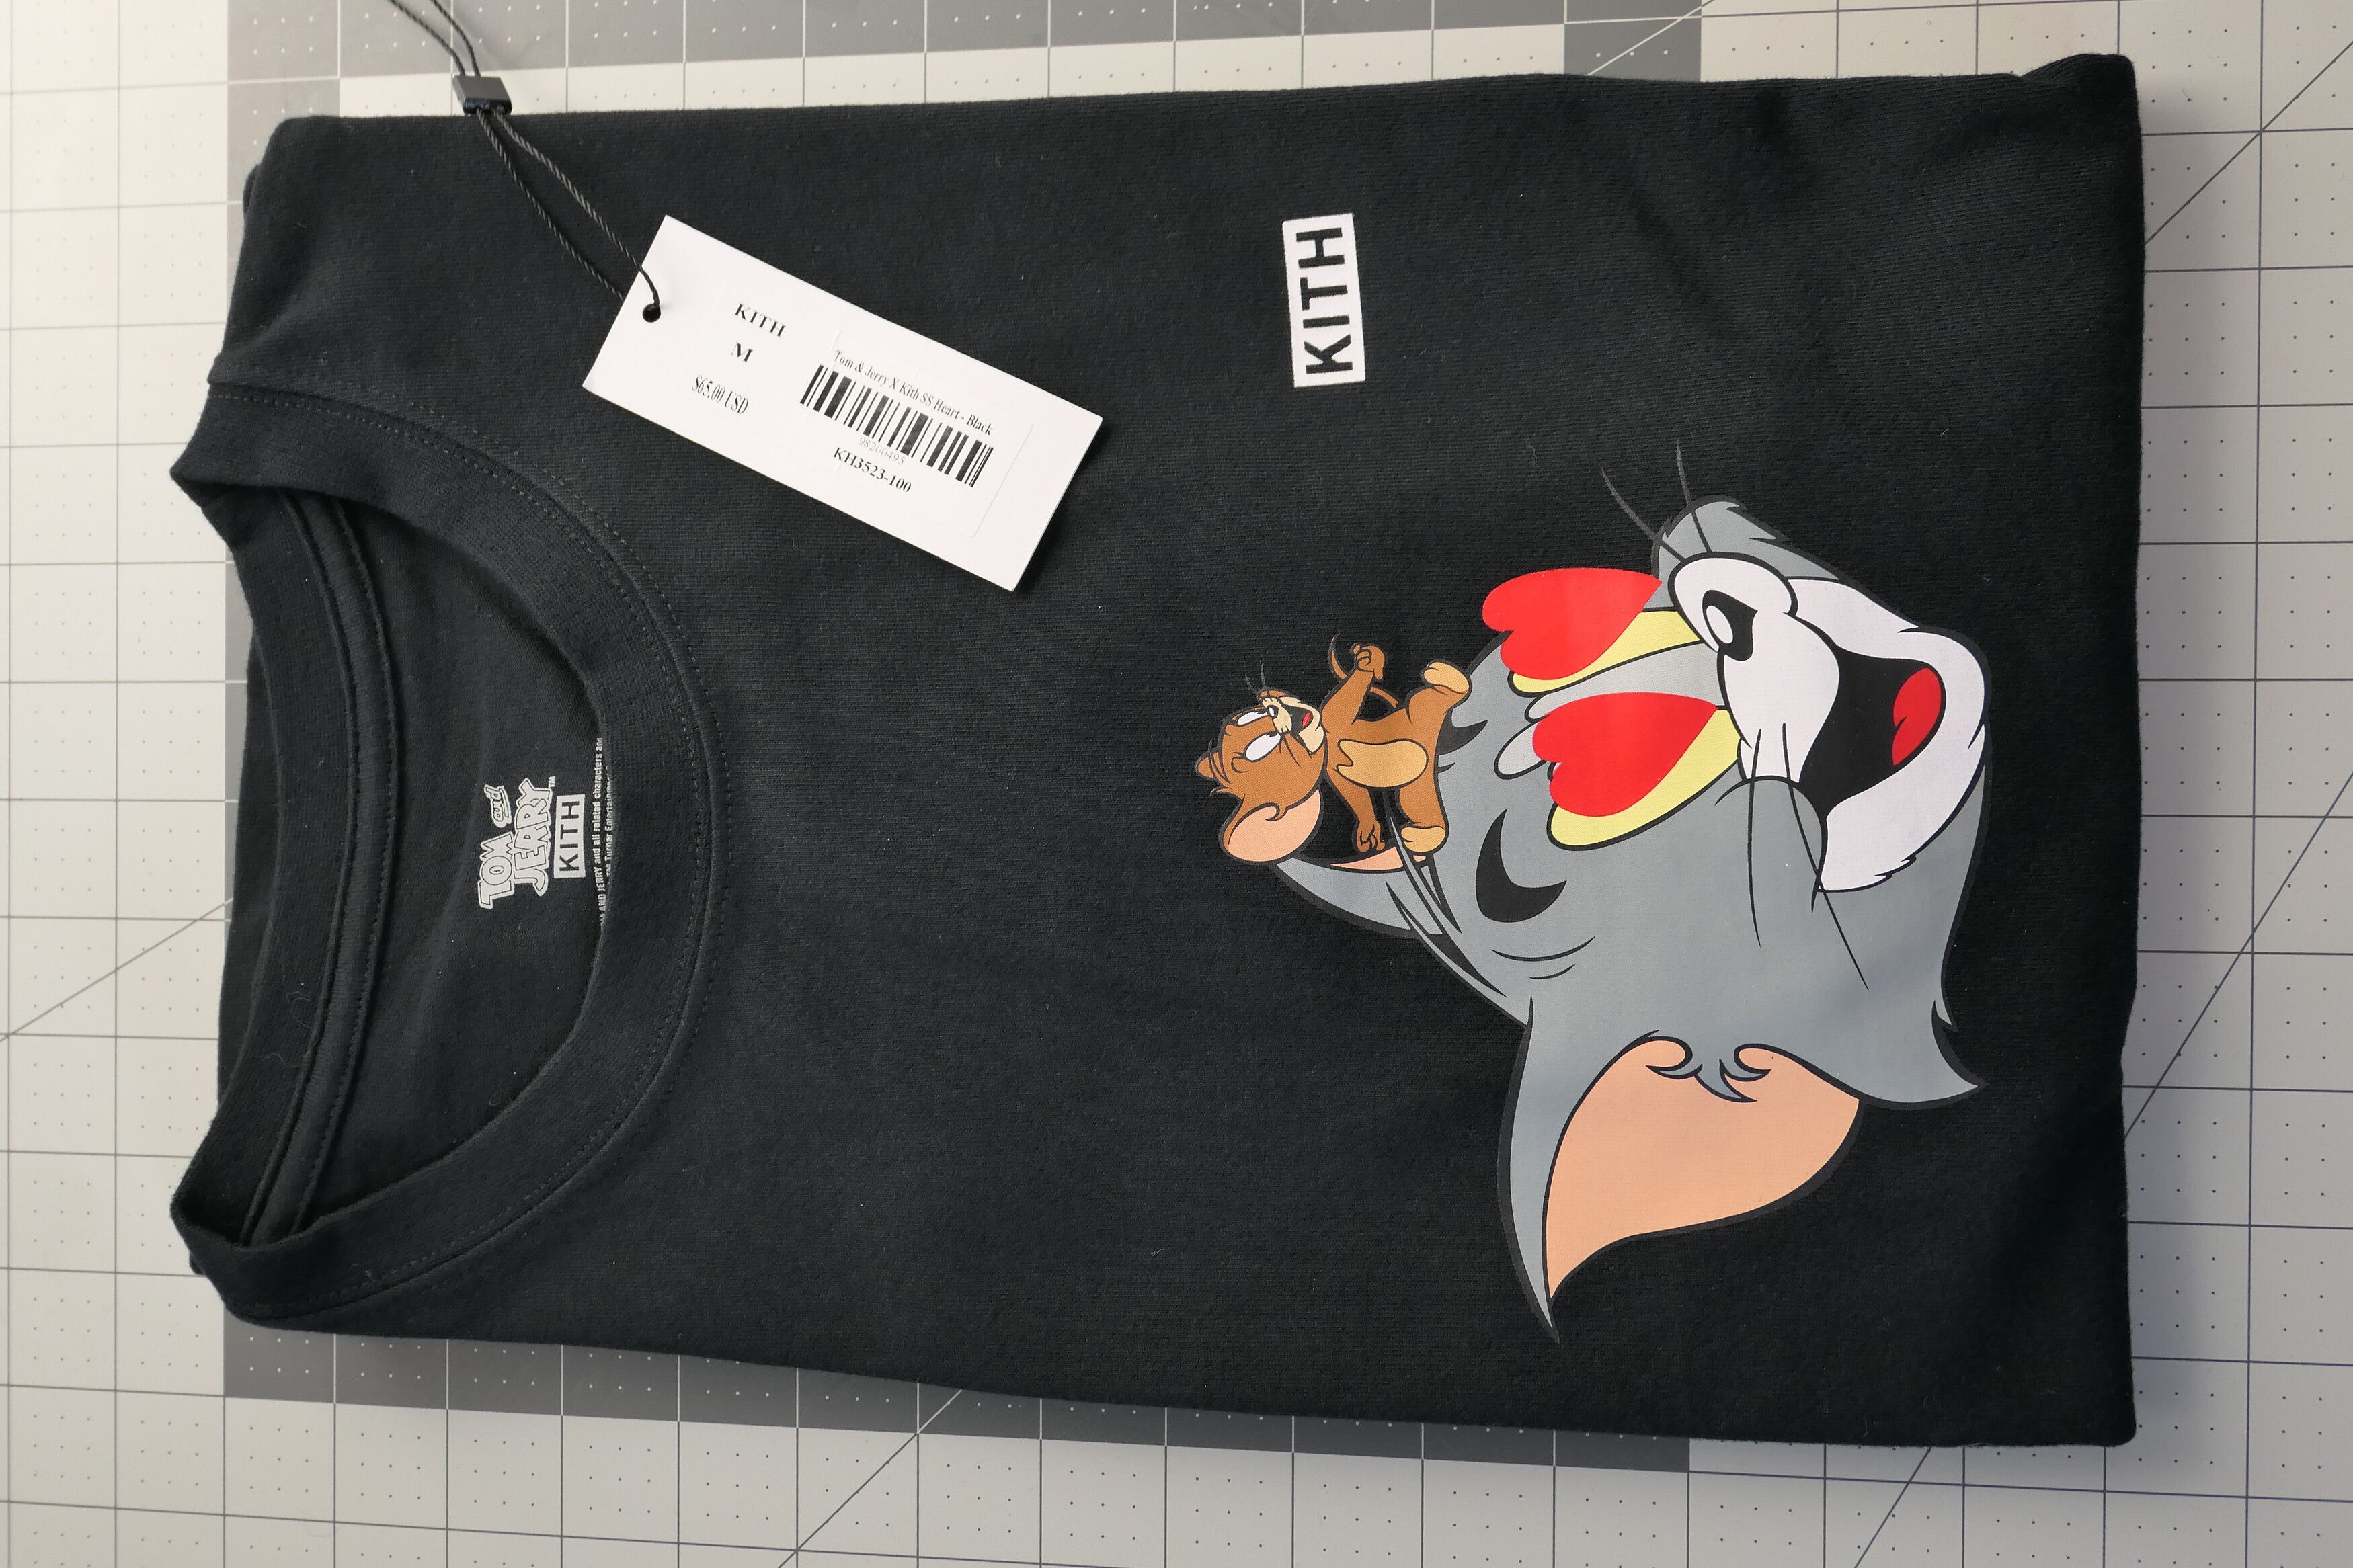 Kith Tom Jerry | Grailed